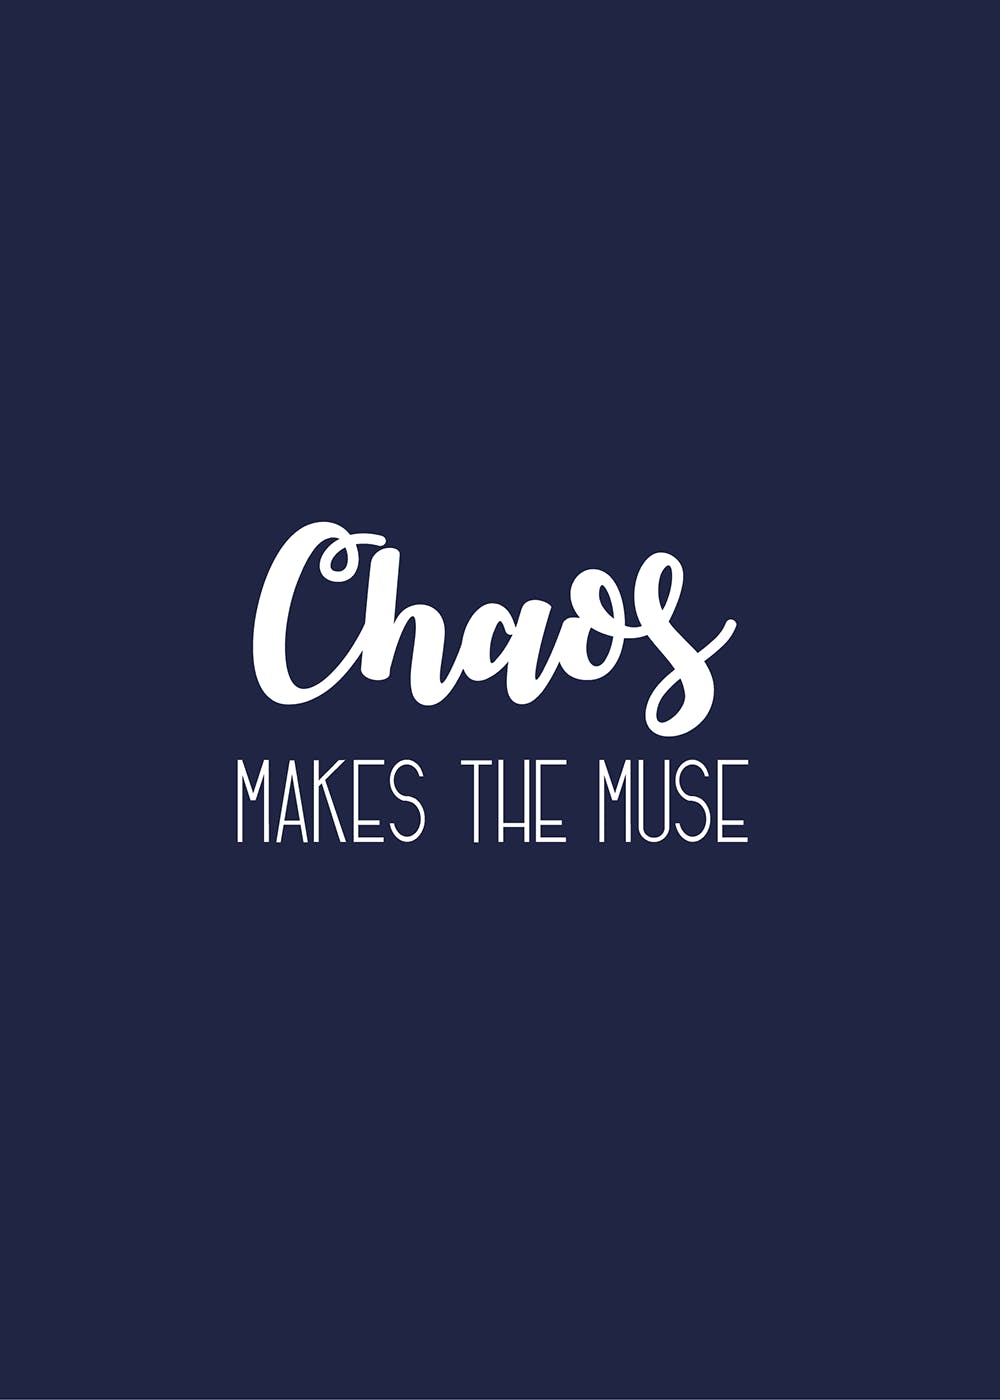 Chaos makes the muse